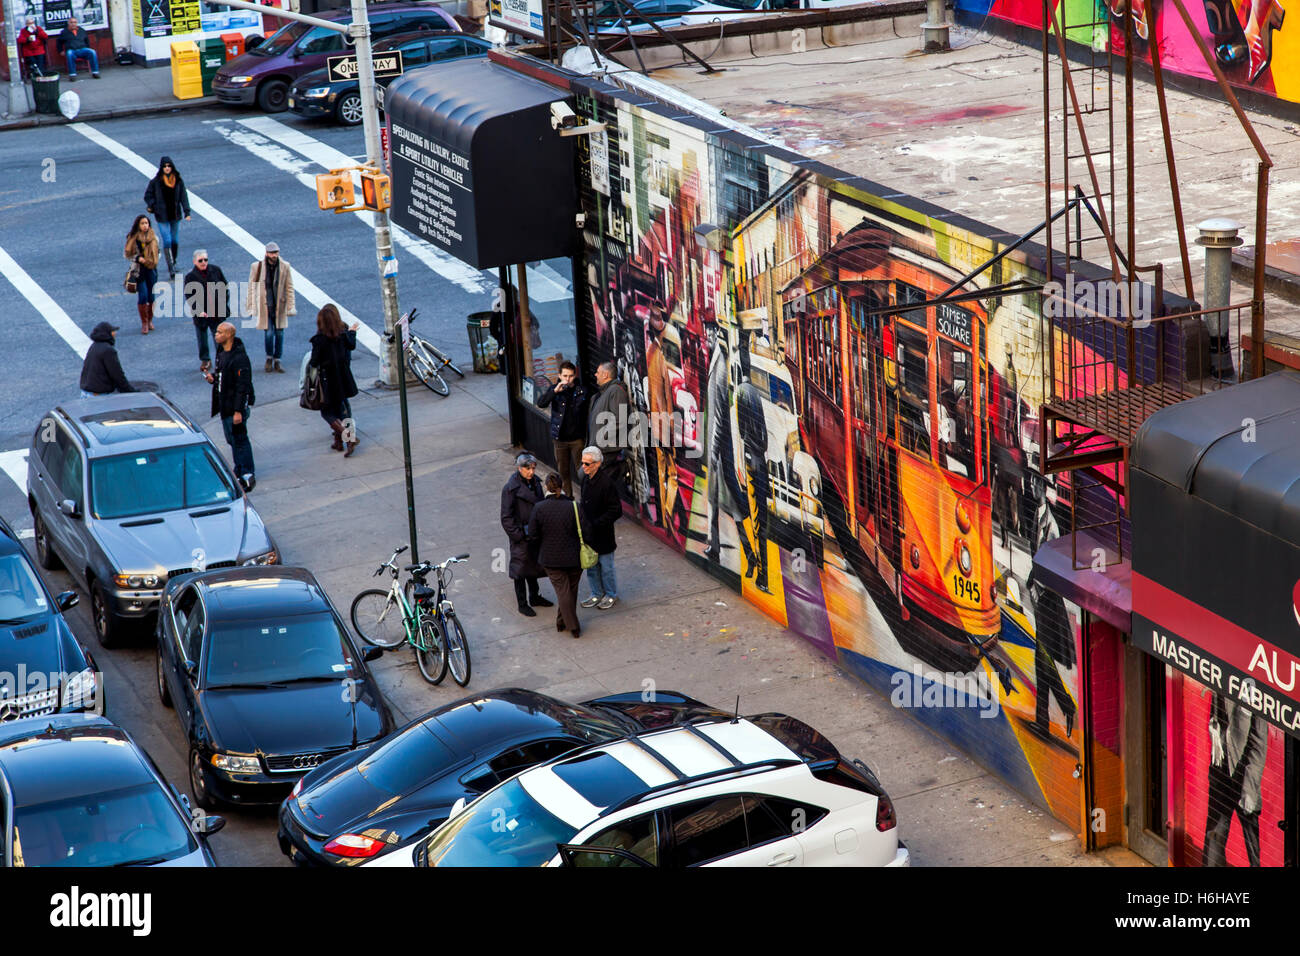 NEW-YORK - NOV 17: Wall painting of a tram in Times Square on a busy Manhattan street in New-York, USA on November 17, 2012. Stock Photo